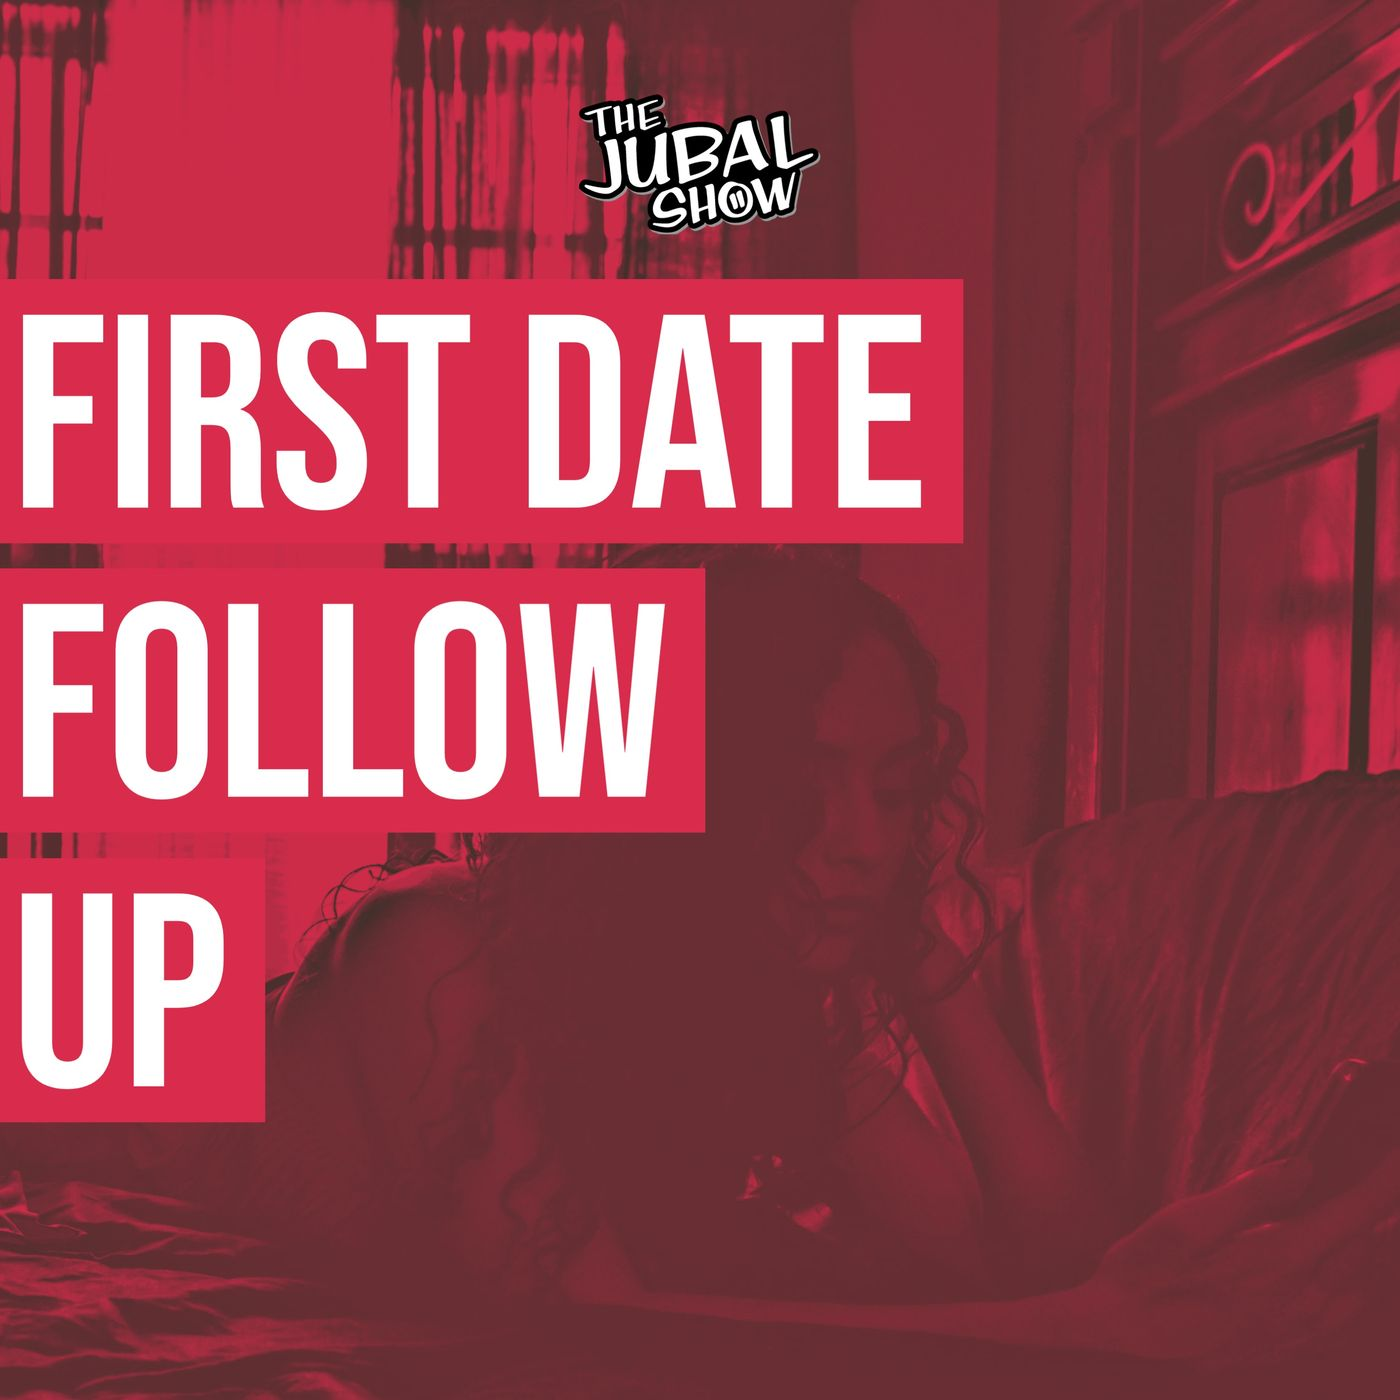 This First Date Follow Up has the biggest plot twist!